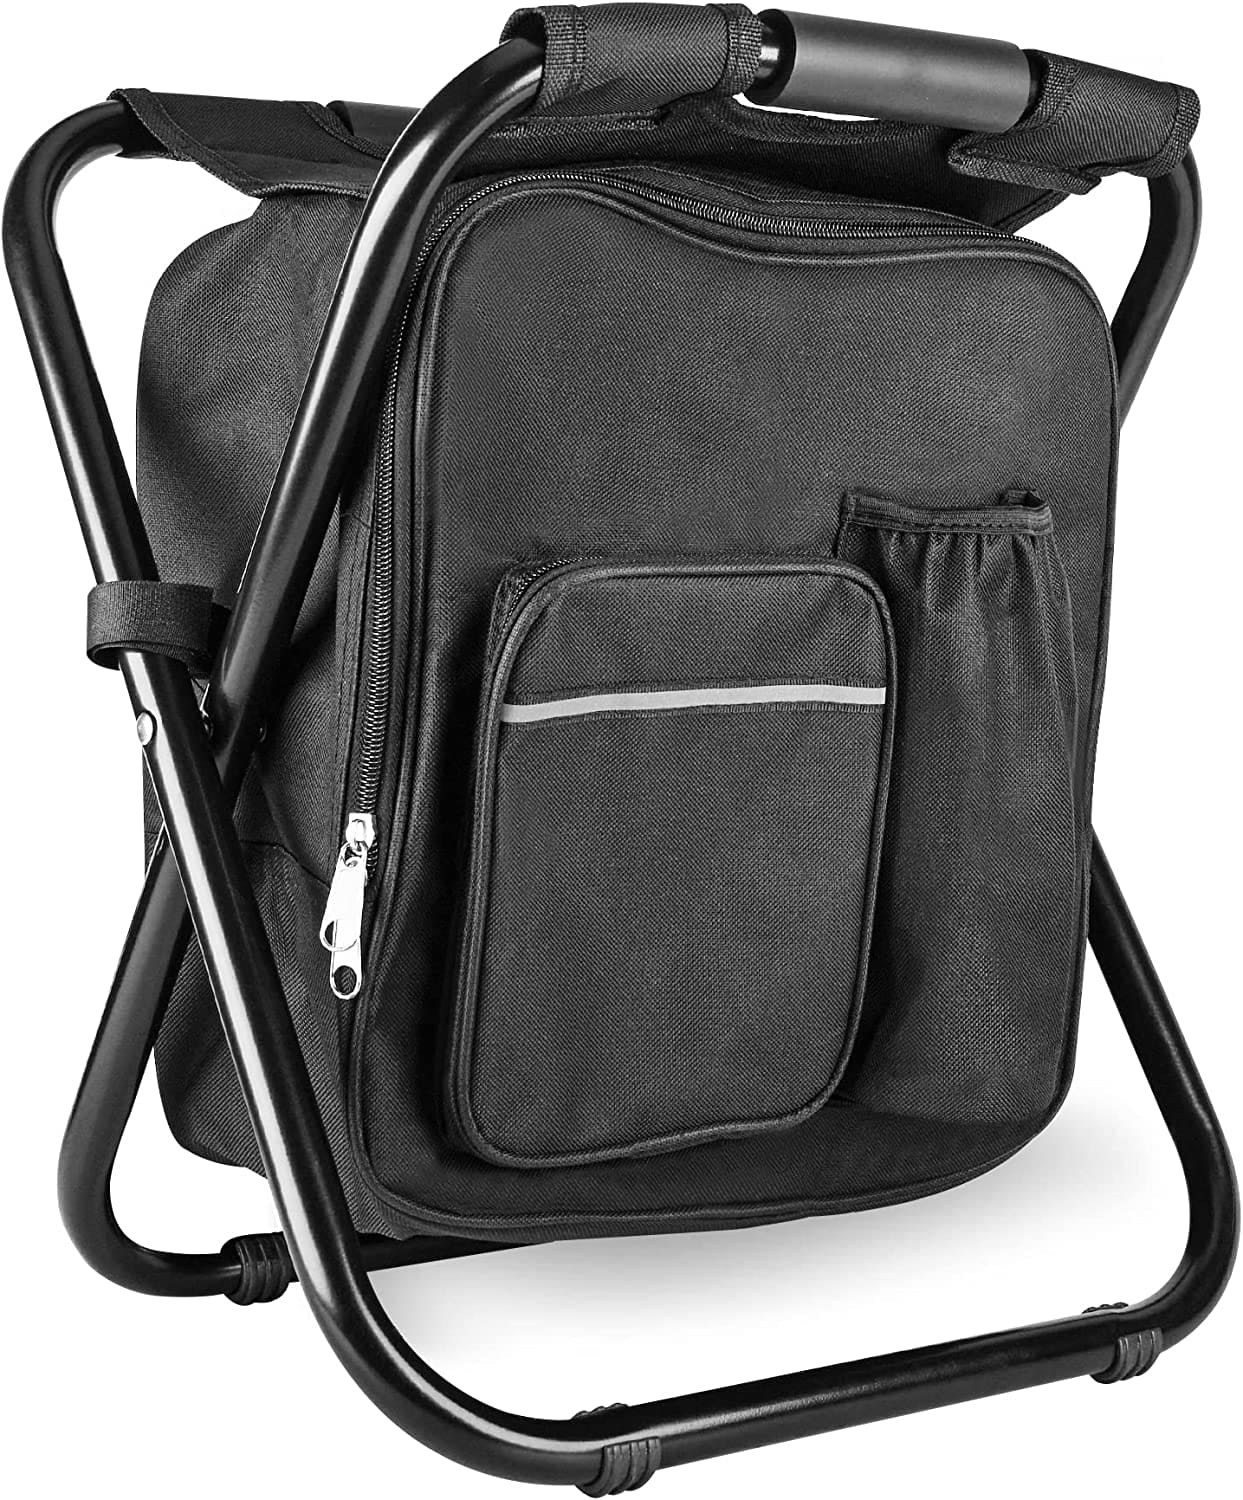 A black backpack that also transforms into a stool. Its the perfect travel companion.